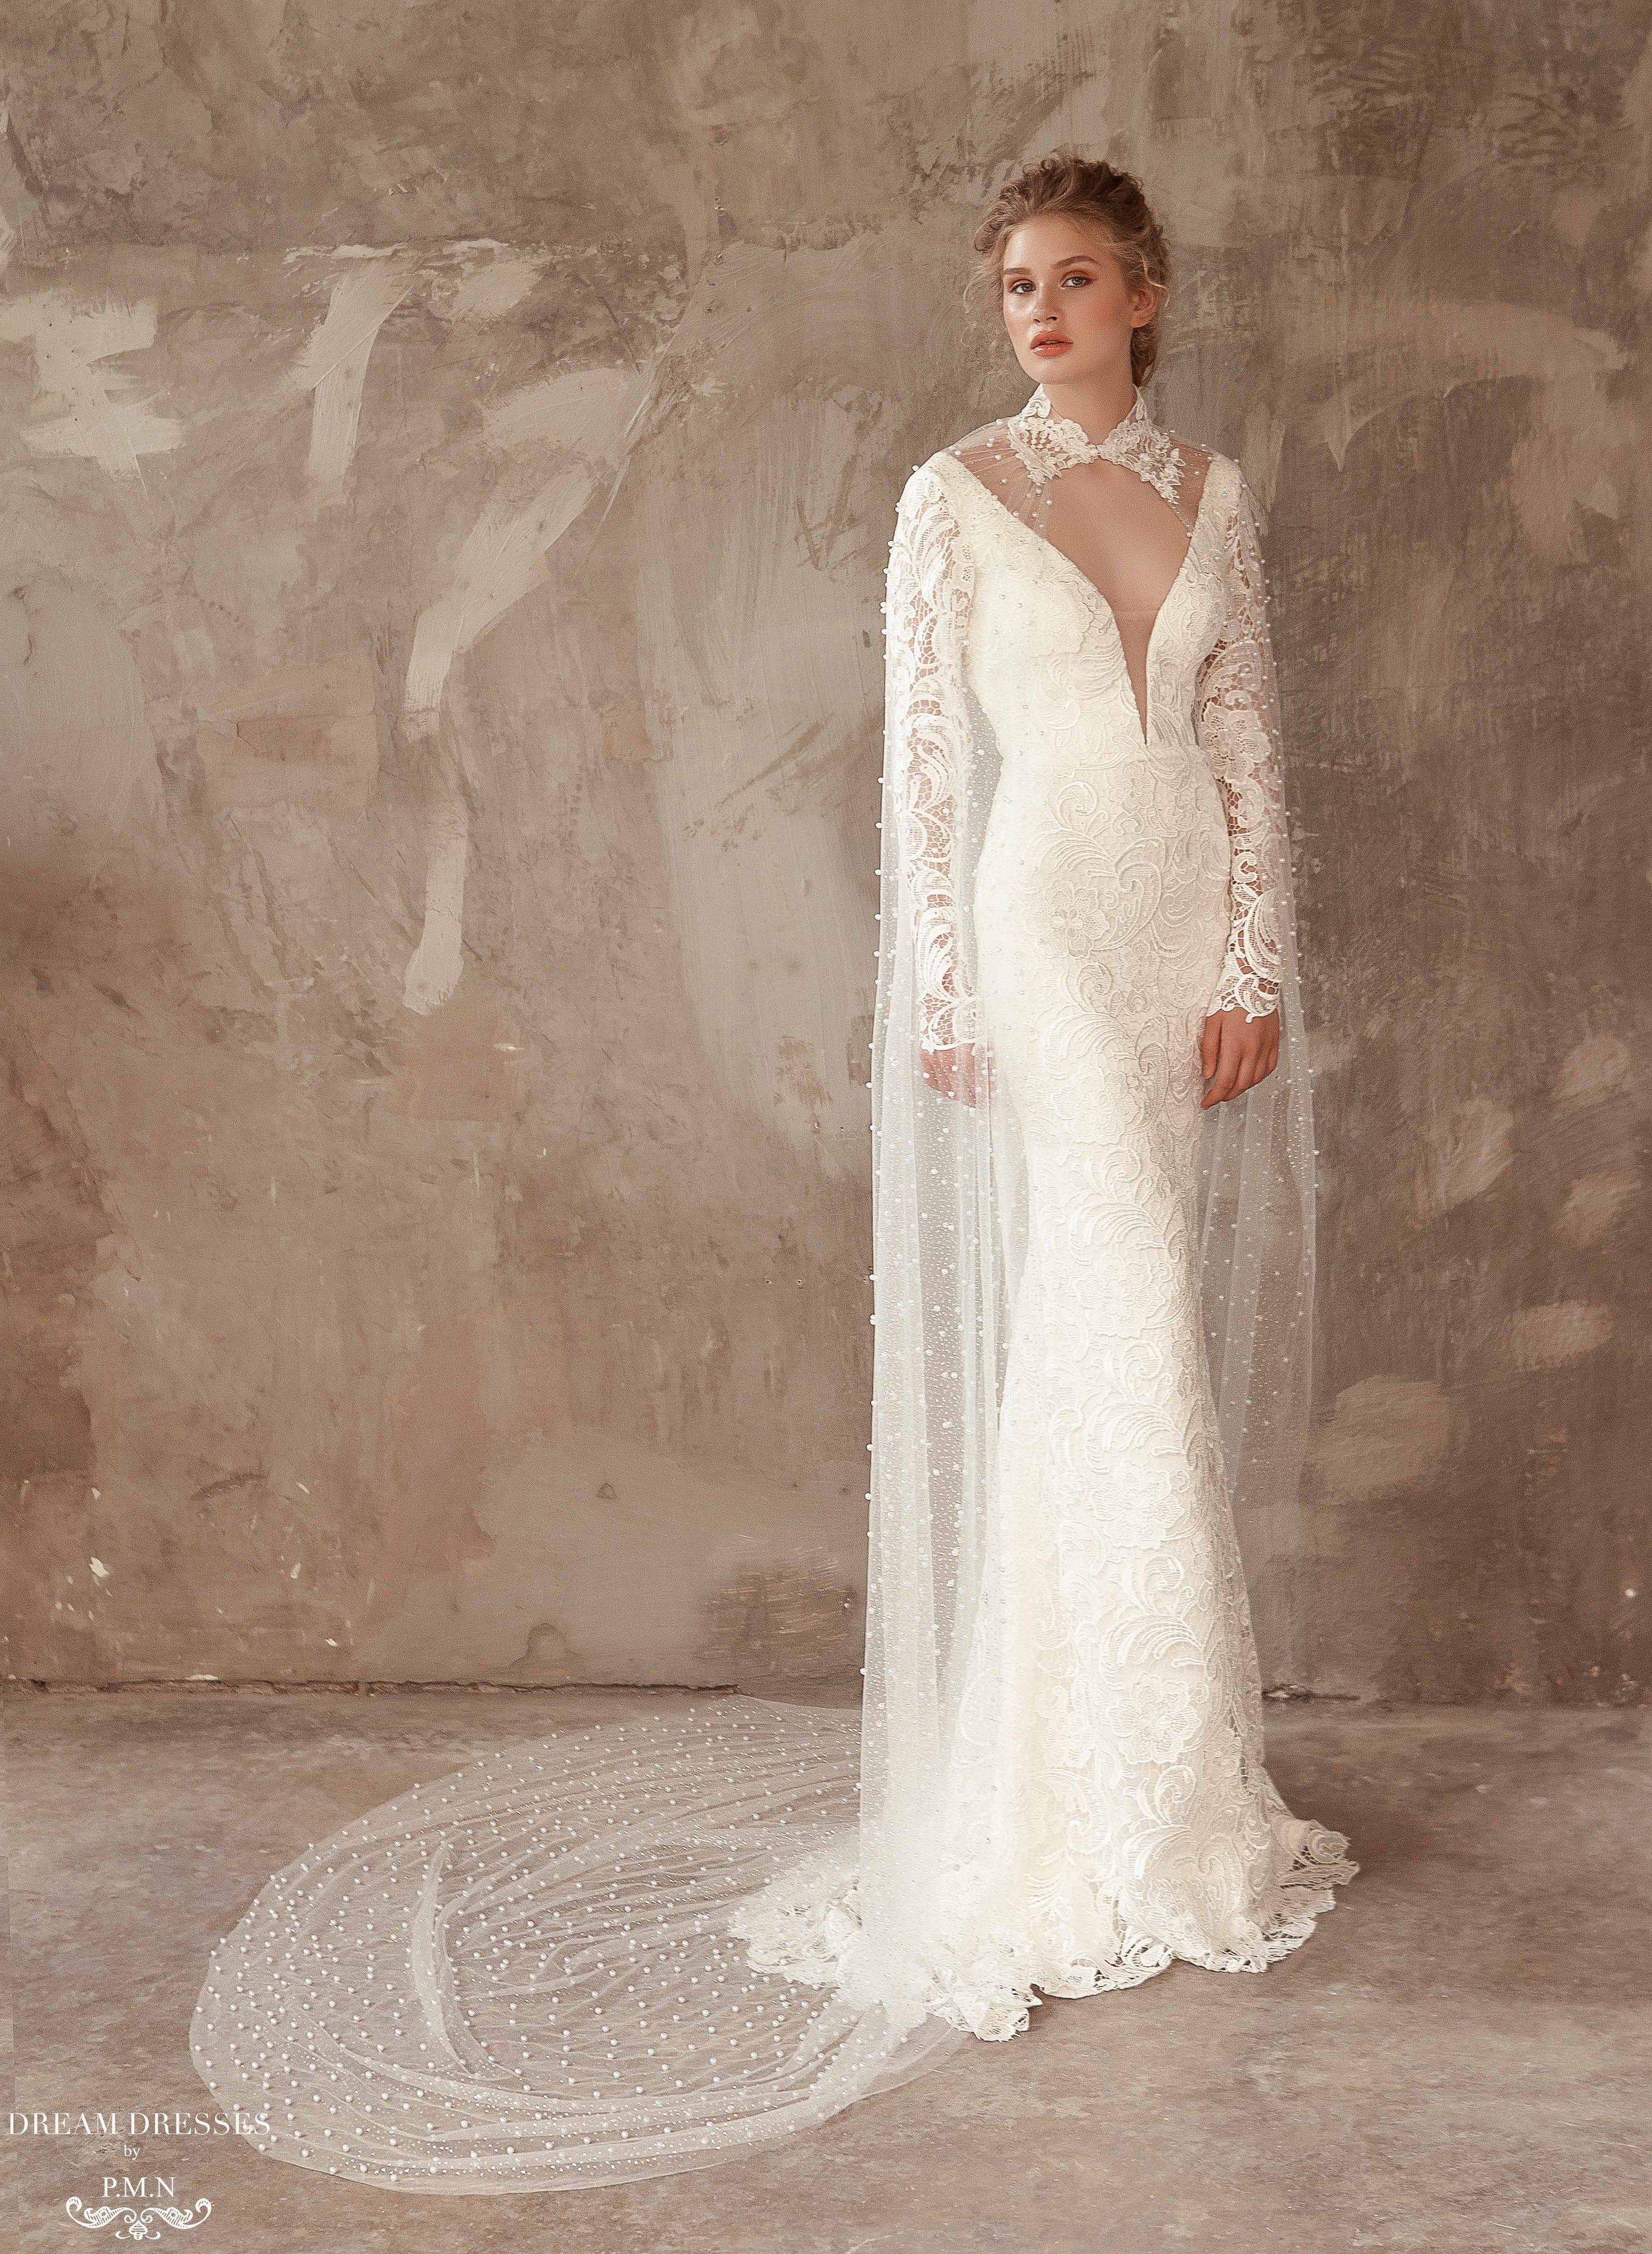 Cathedral Bridal Cape | Dream Dresses by P.M.N | Dream Dresses by P.M.N.